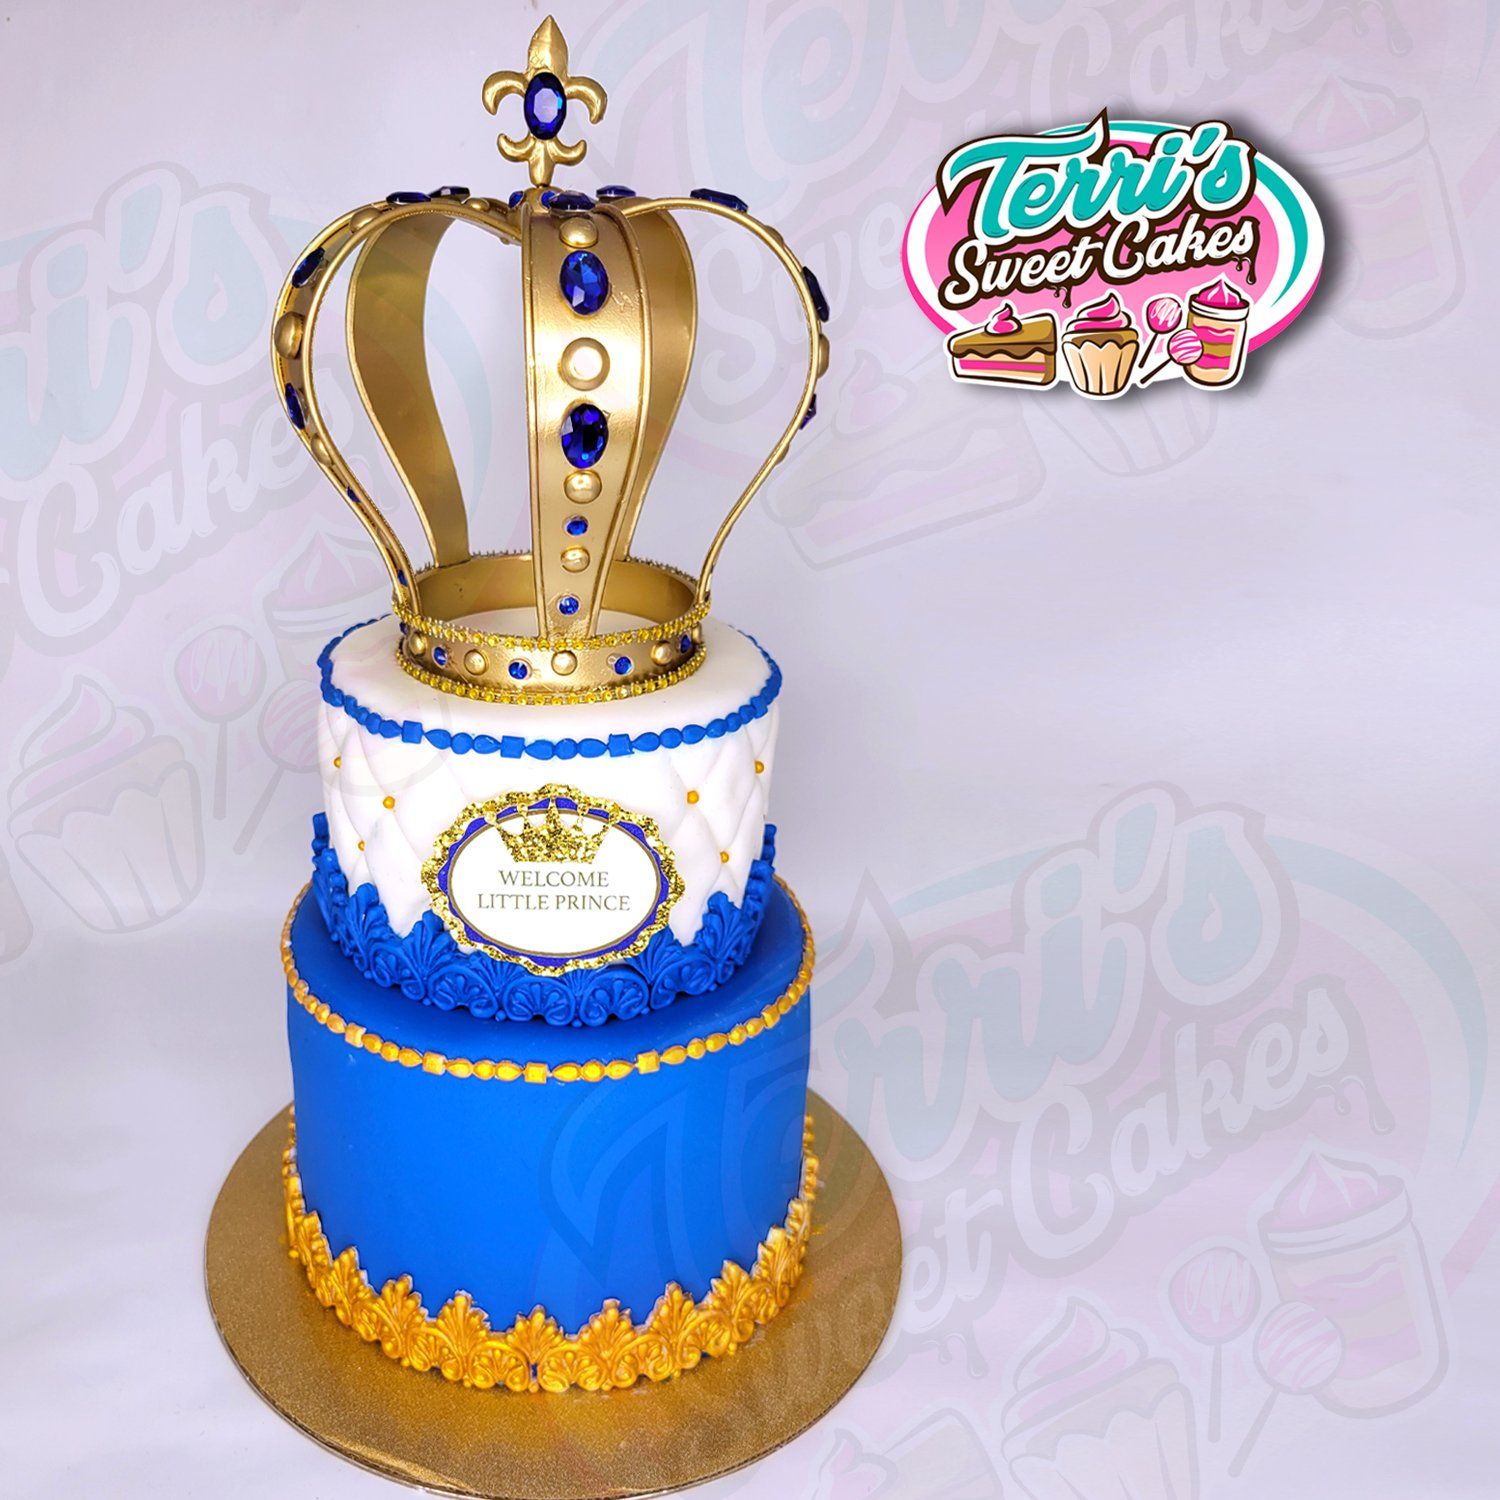 Royal Blue Prince Baby Shower Cake by Terri's Sweet Cakes